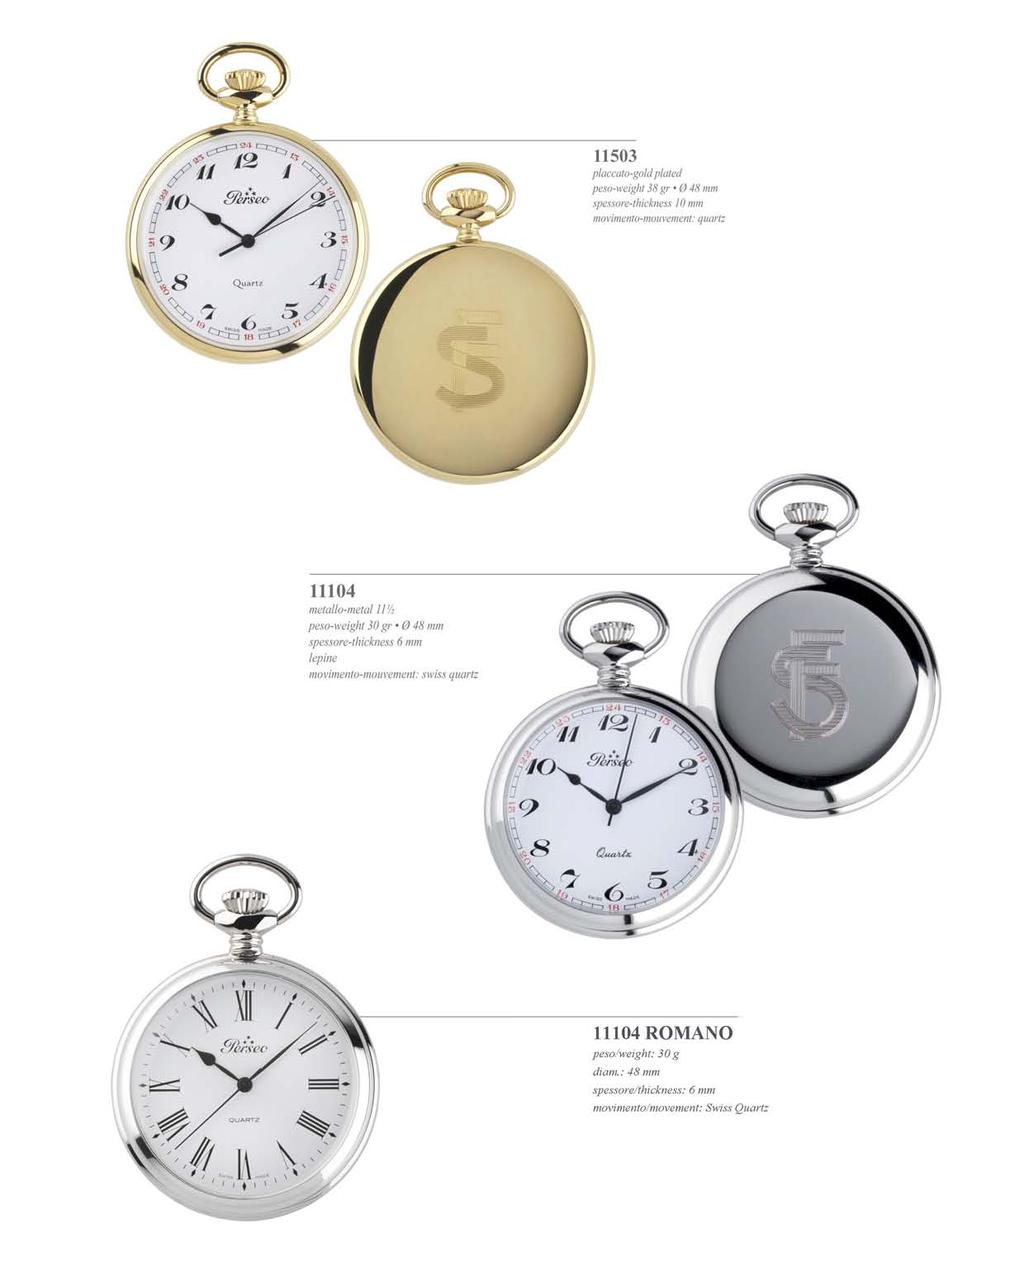 11503 placcato-gold plated peso-weight 38 gr Ø 48 mm spessore-thickness 10 mm quartz 11104 11½ peso-weight 30 gr Ø 48 mm